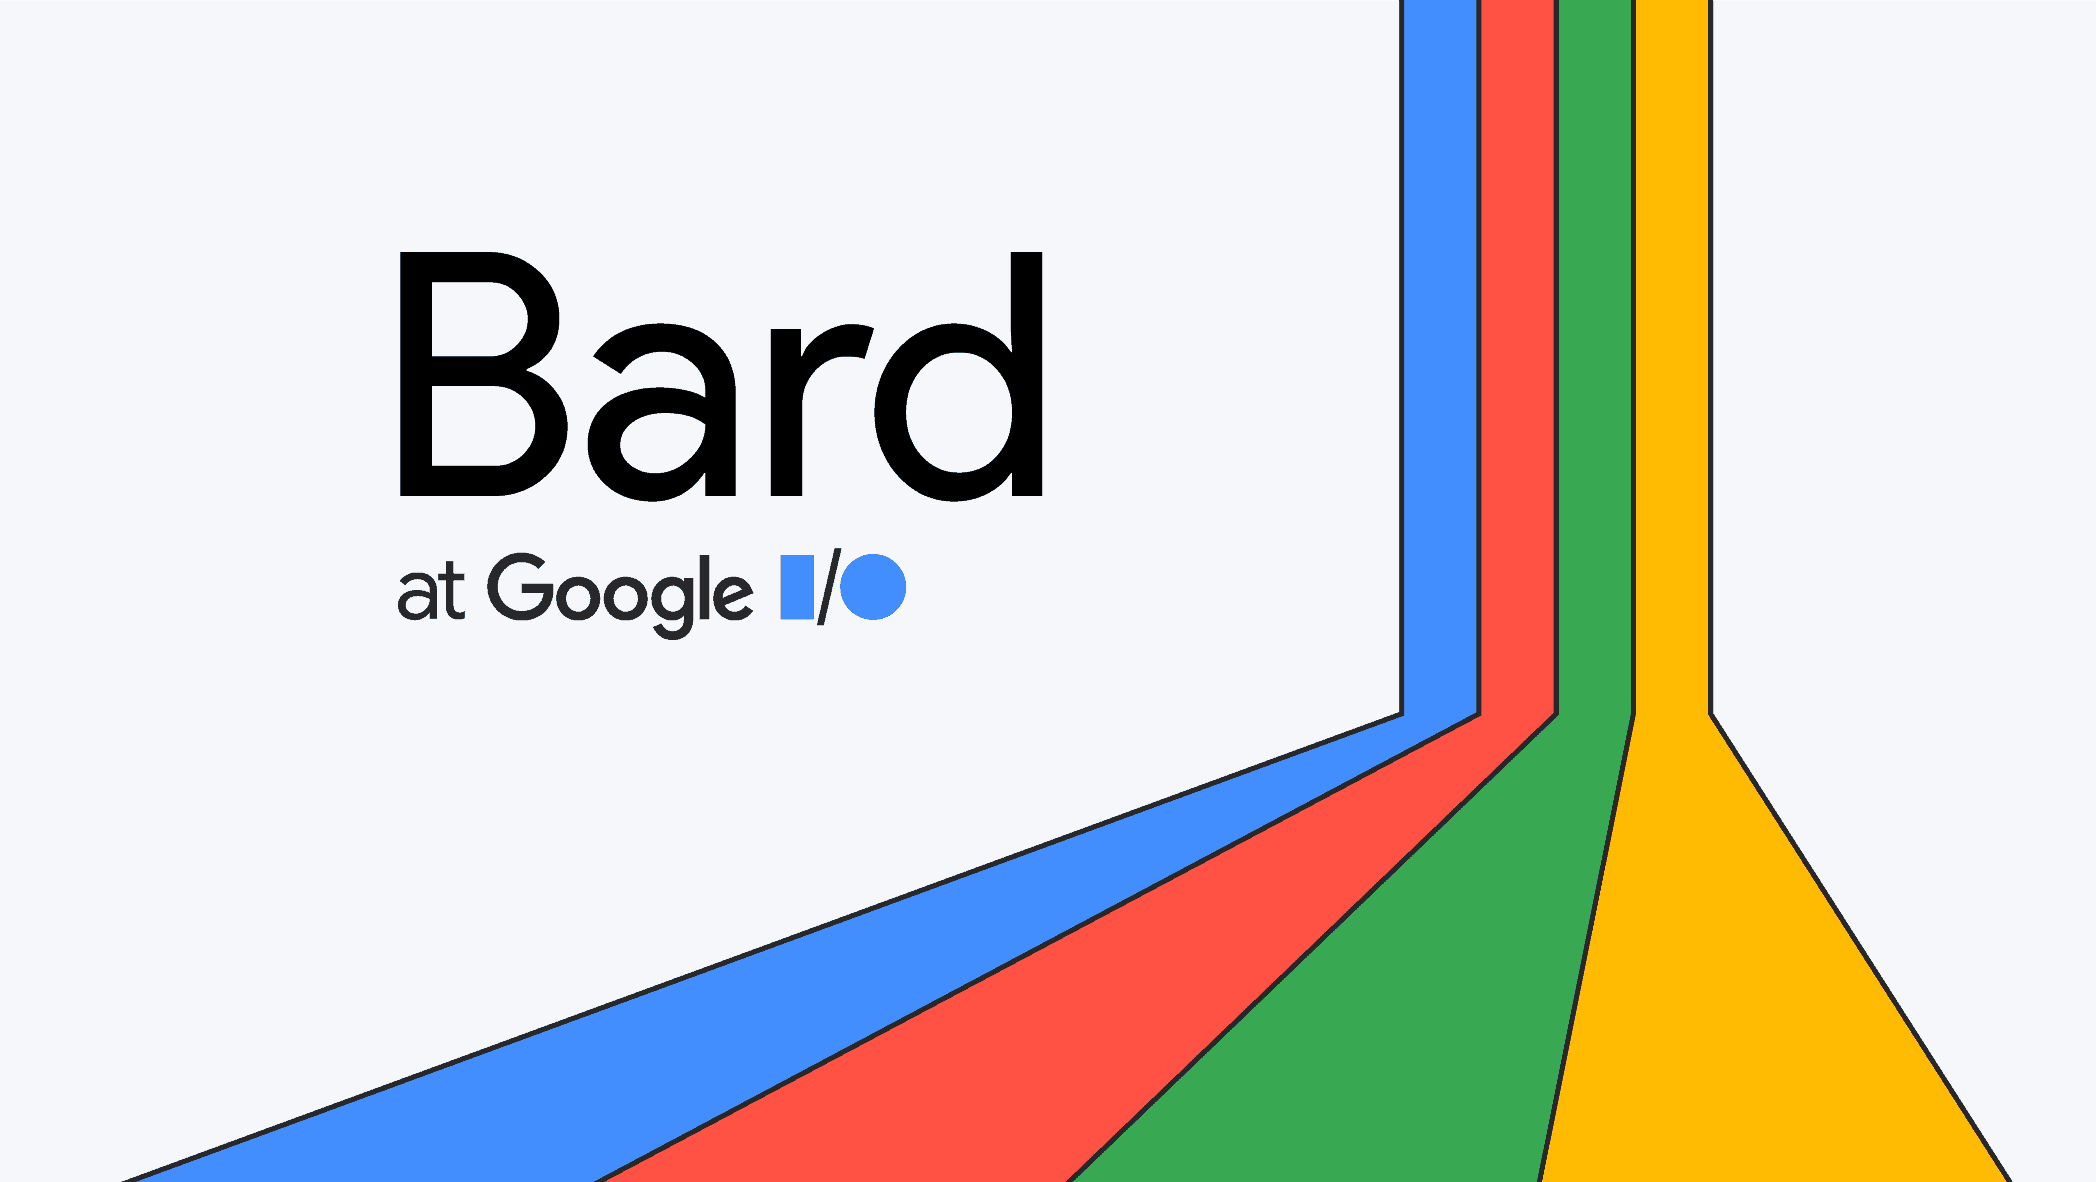 Googles Bard is available in new territories, but the EU is excluded